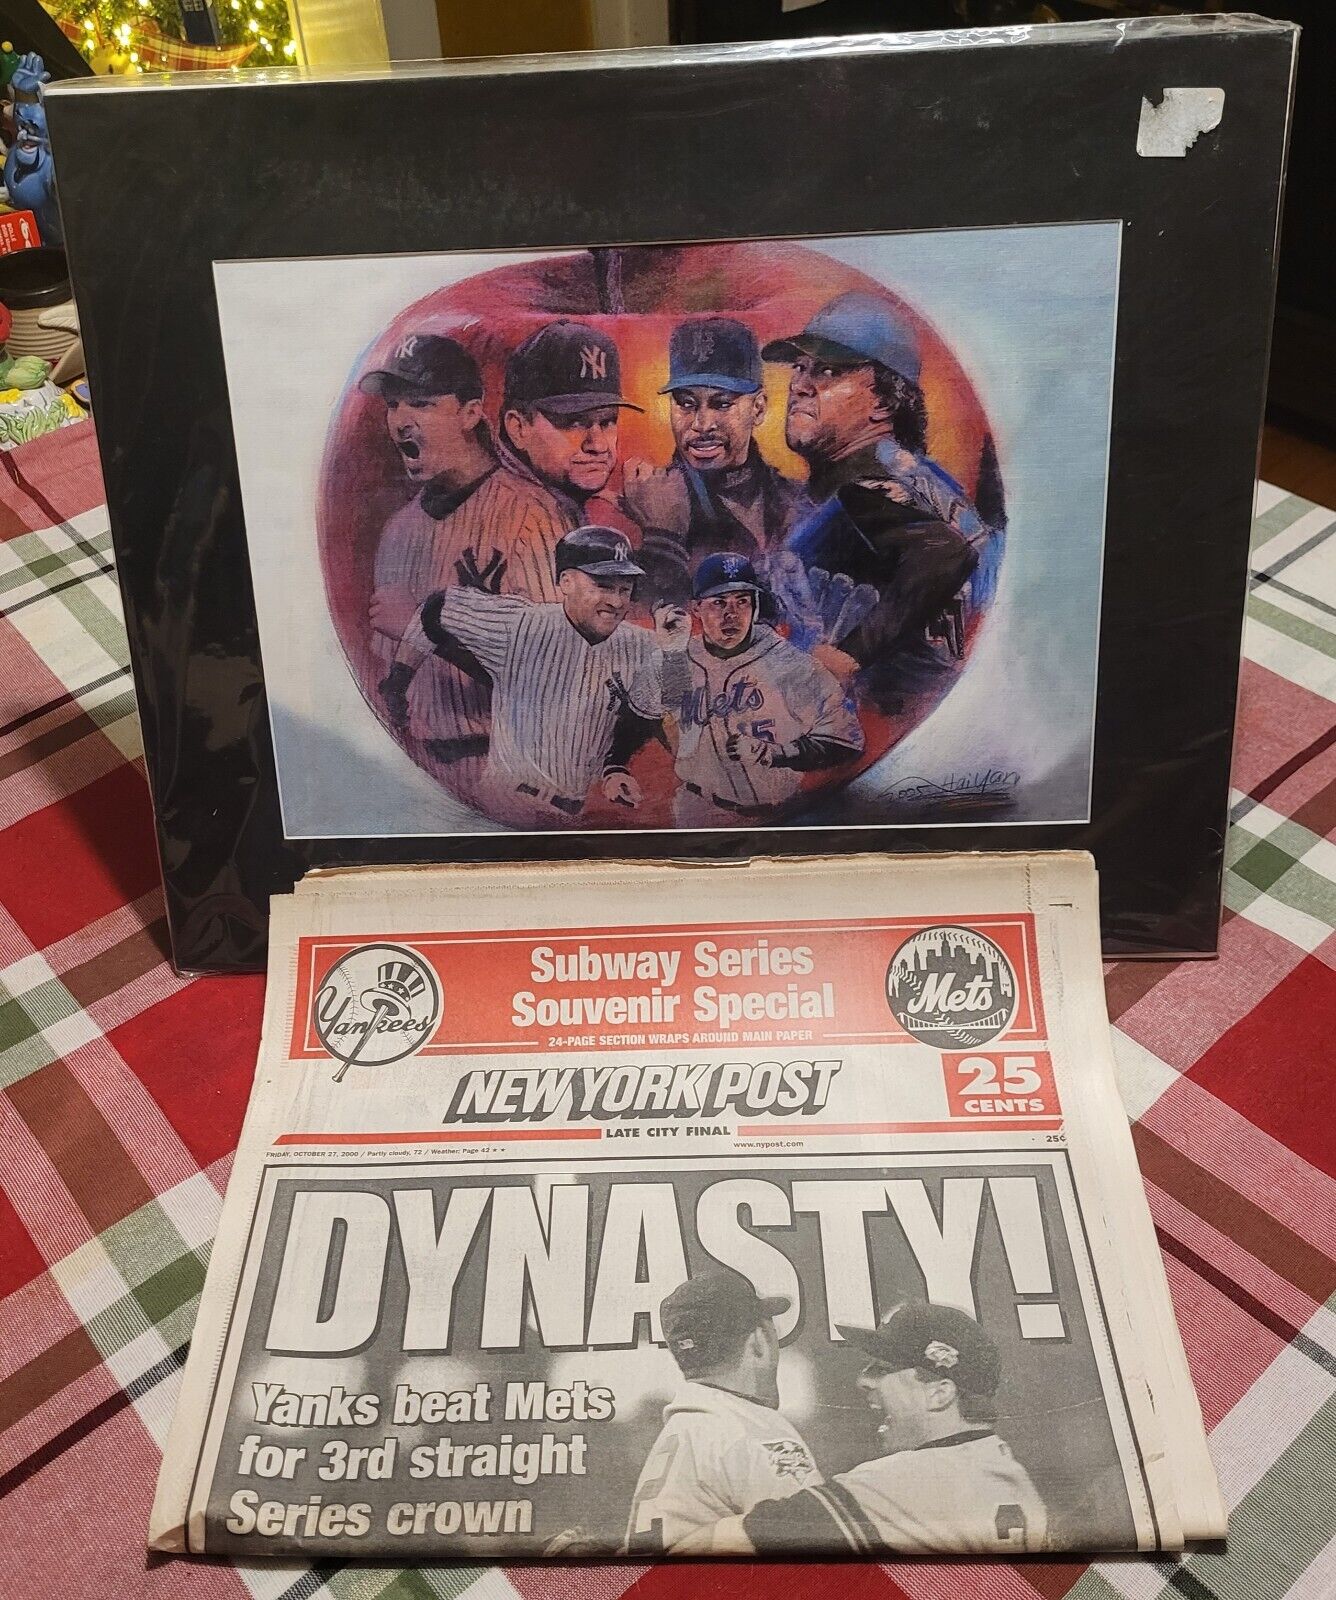 New York Post Yankees Beat Mets In Subway Series Oct. 27, 2000 W/Lithograph 